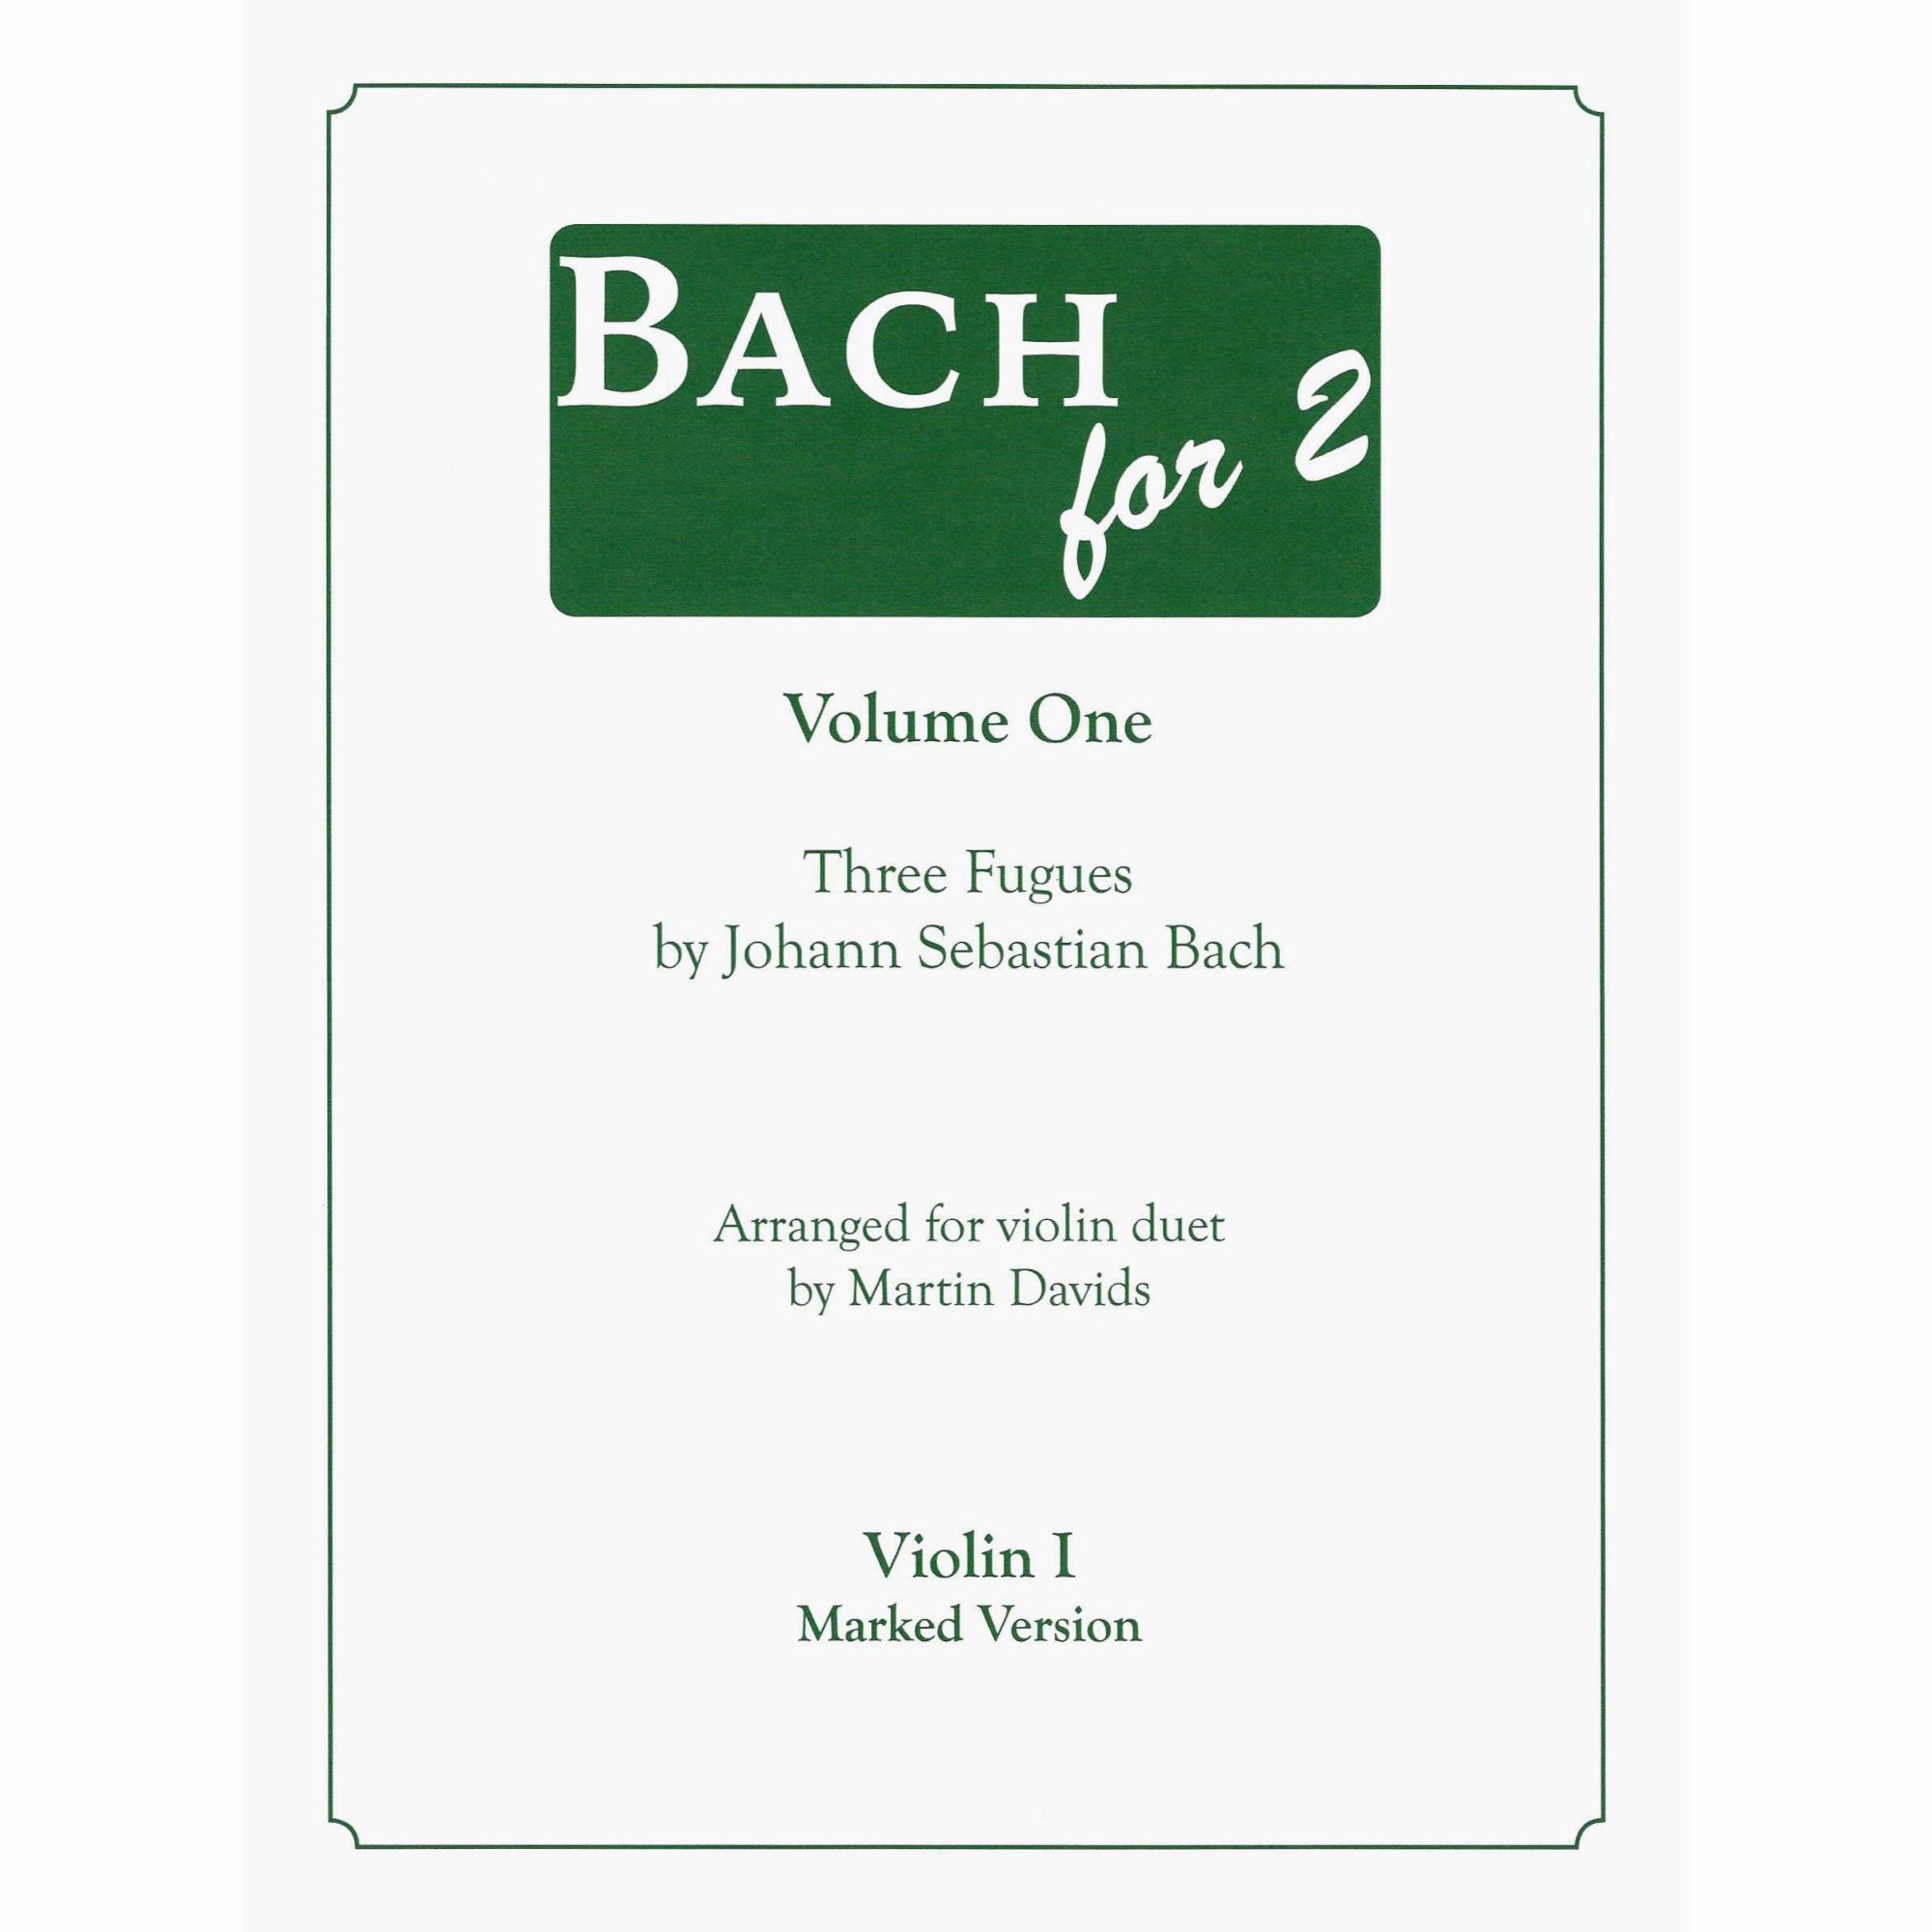 Bach for 2, Volume One for Two Violins